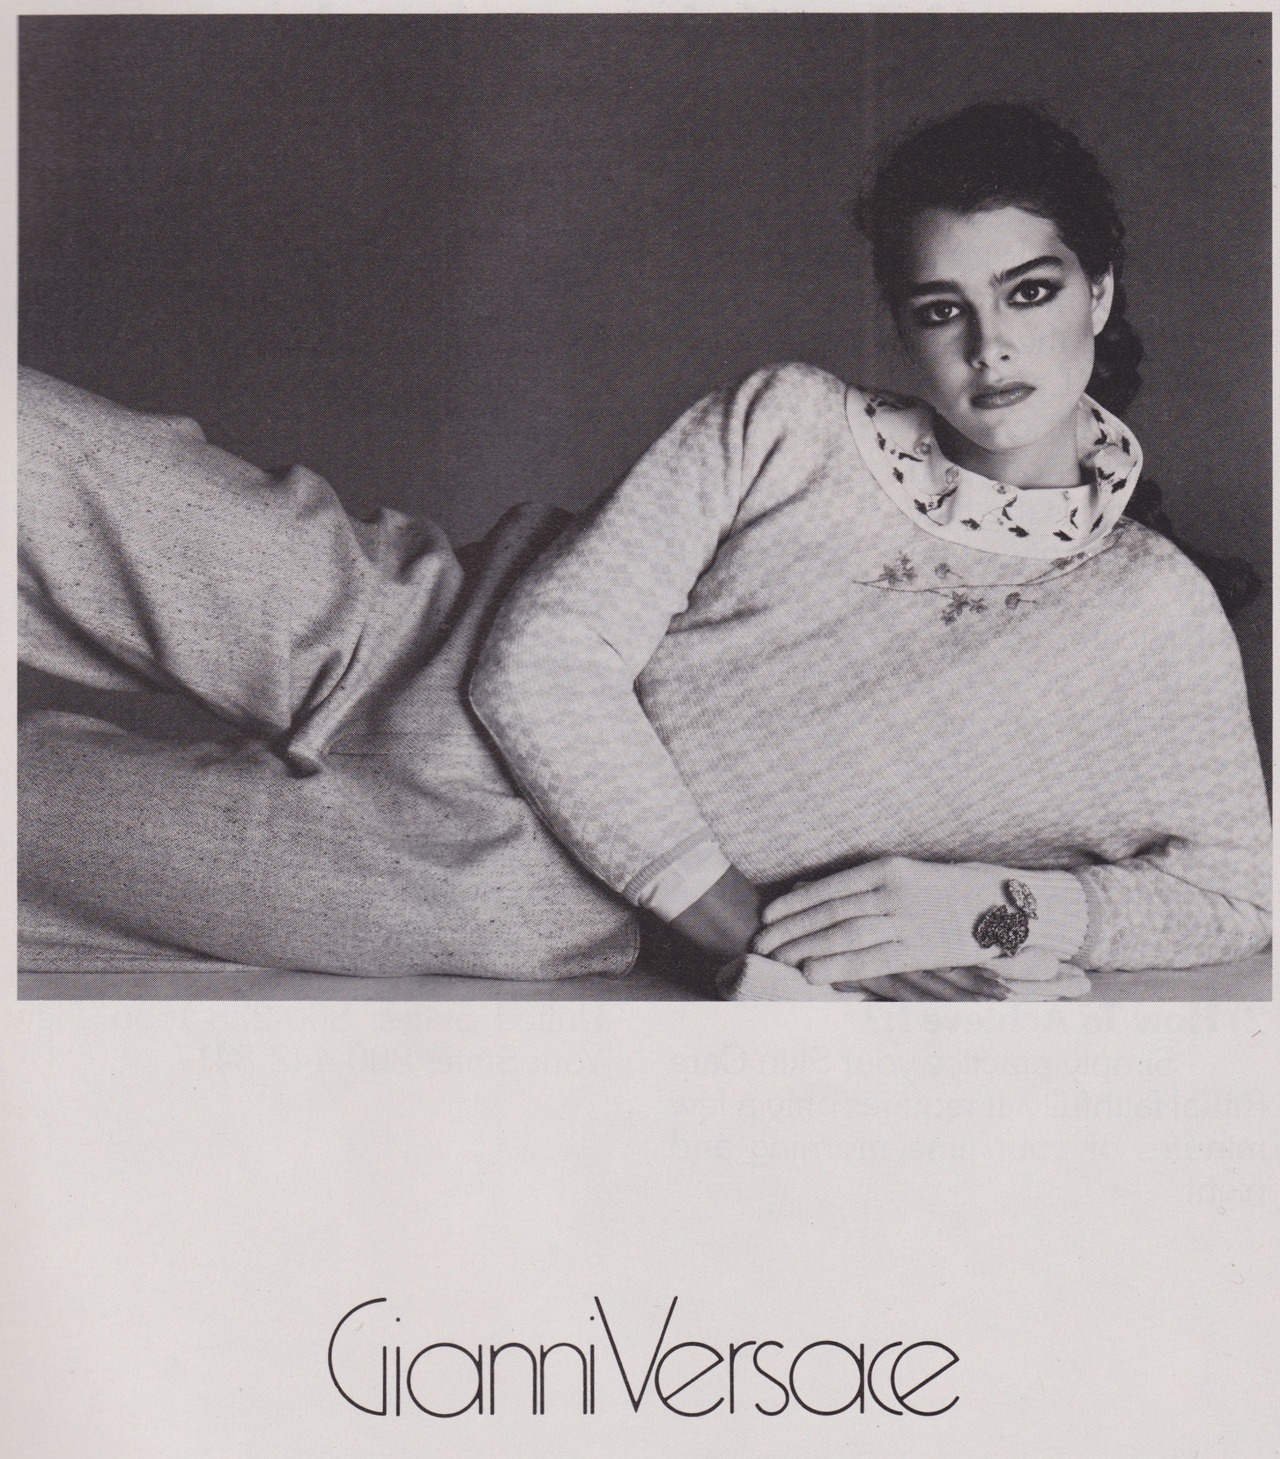 Featherstone Vintage — Brooke Shields in Gianni Versace Vogue US